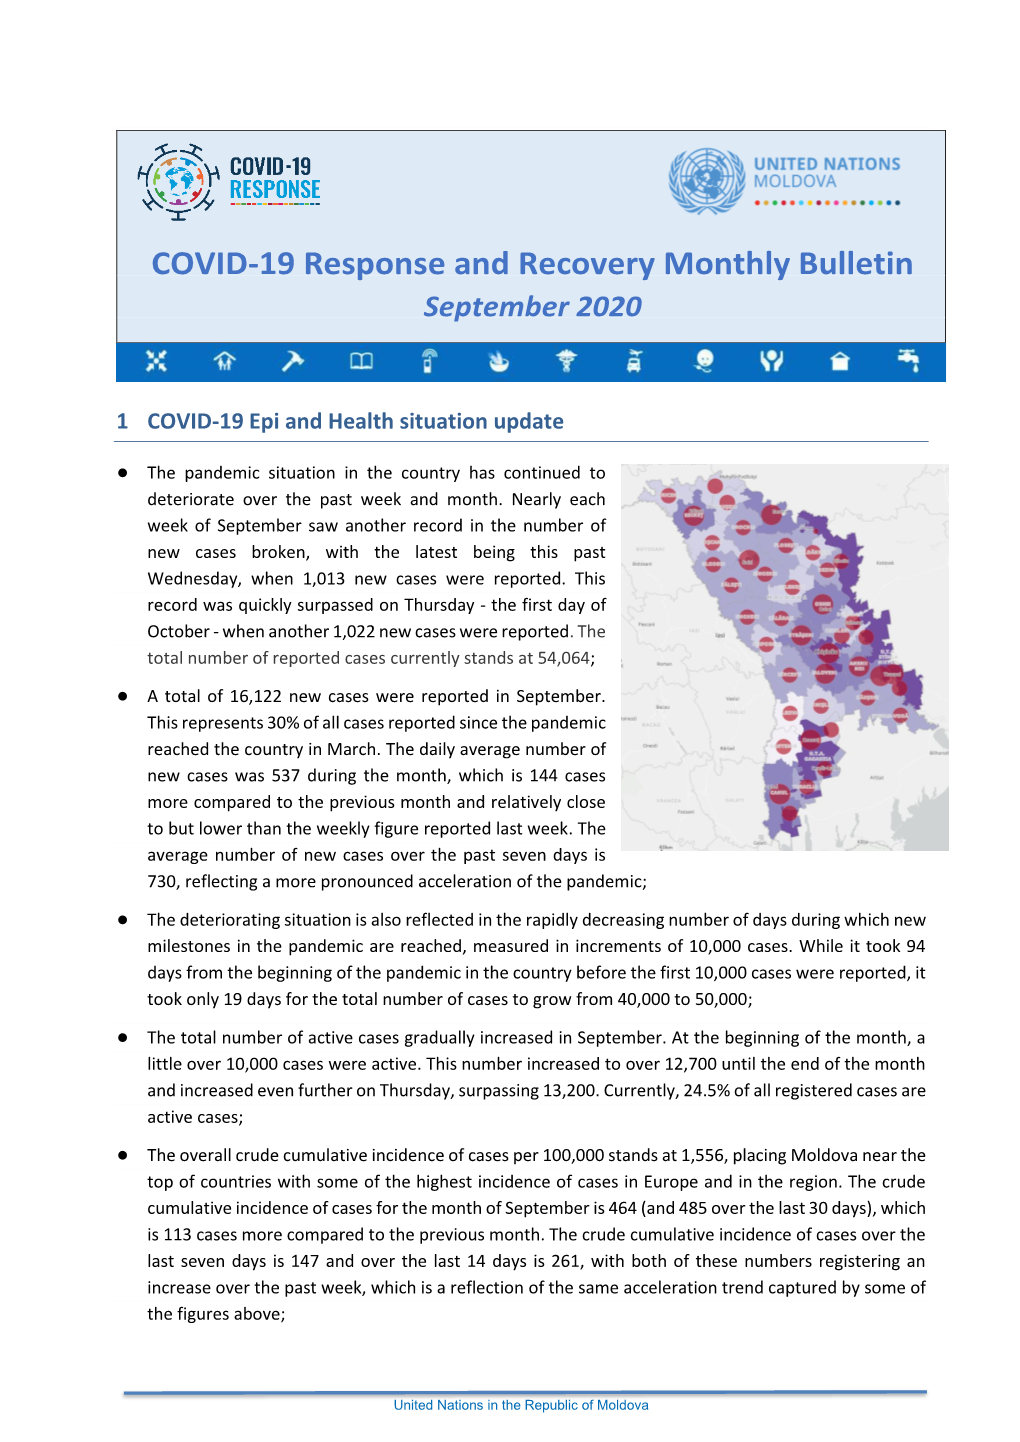 COVID-19 Response and Recovery Monthly Bulletin September 2020